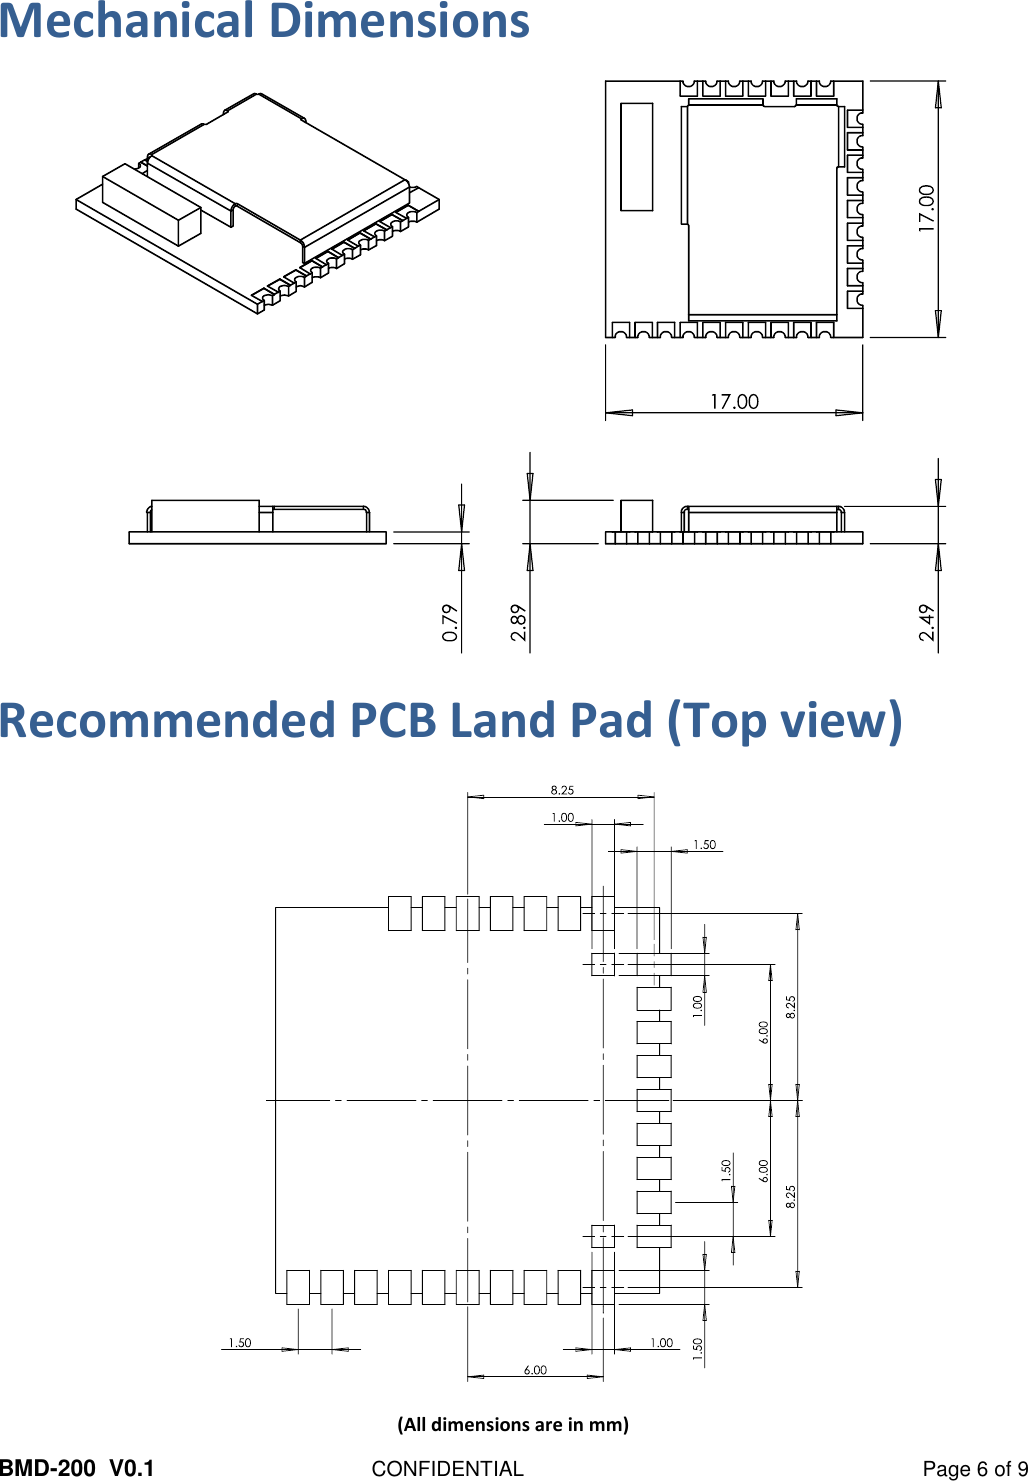  BMD-200  V0.1  CONFIDENTIAL  Page 6 of 9 Mechanical Dimensions     Recommended PCB Land Pad (Top view)   (All dimensions are in mm) 